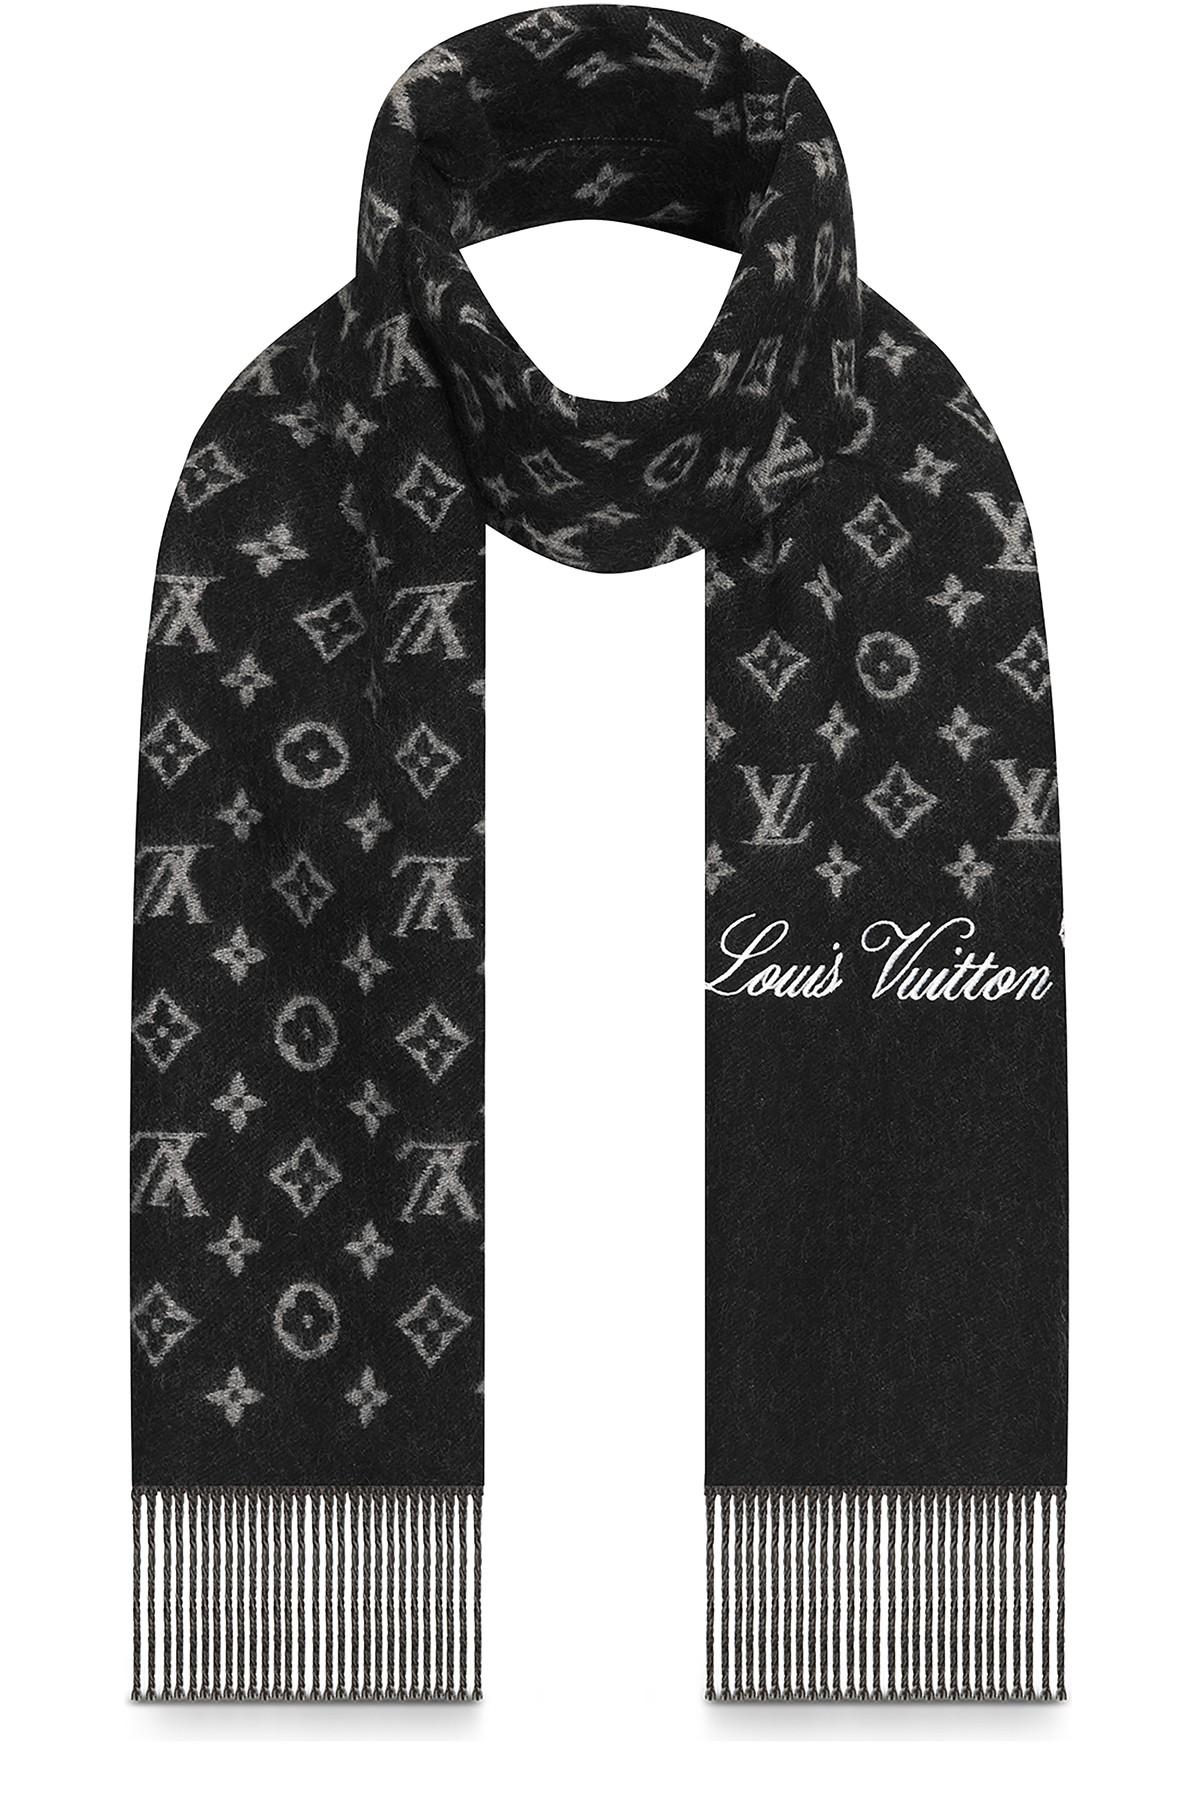 Louis Vuitton Scarf Monogram Wrap Black And White for Sale in